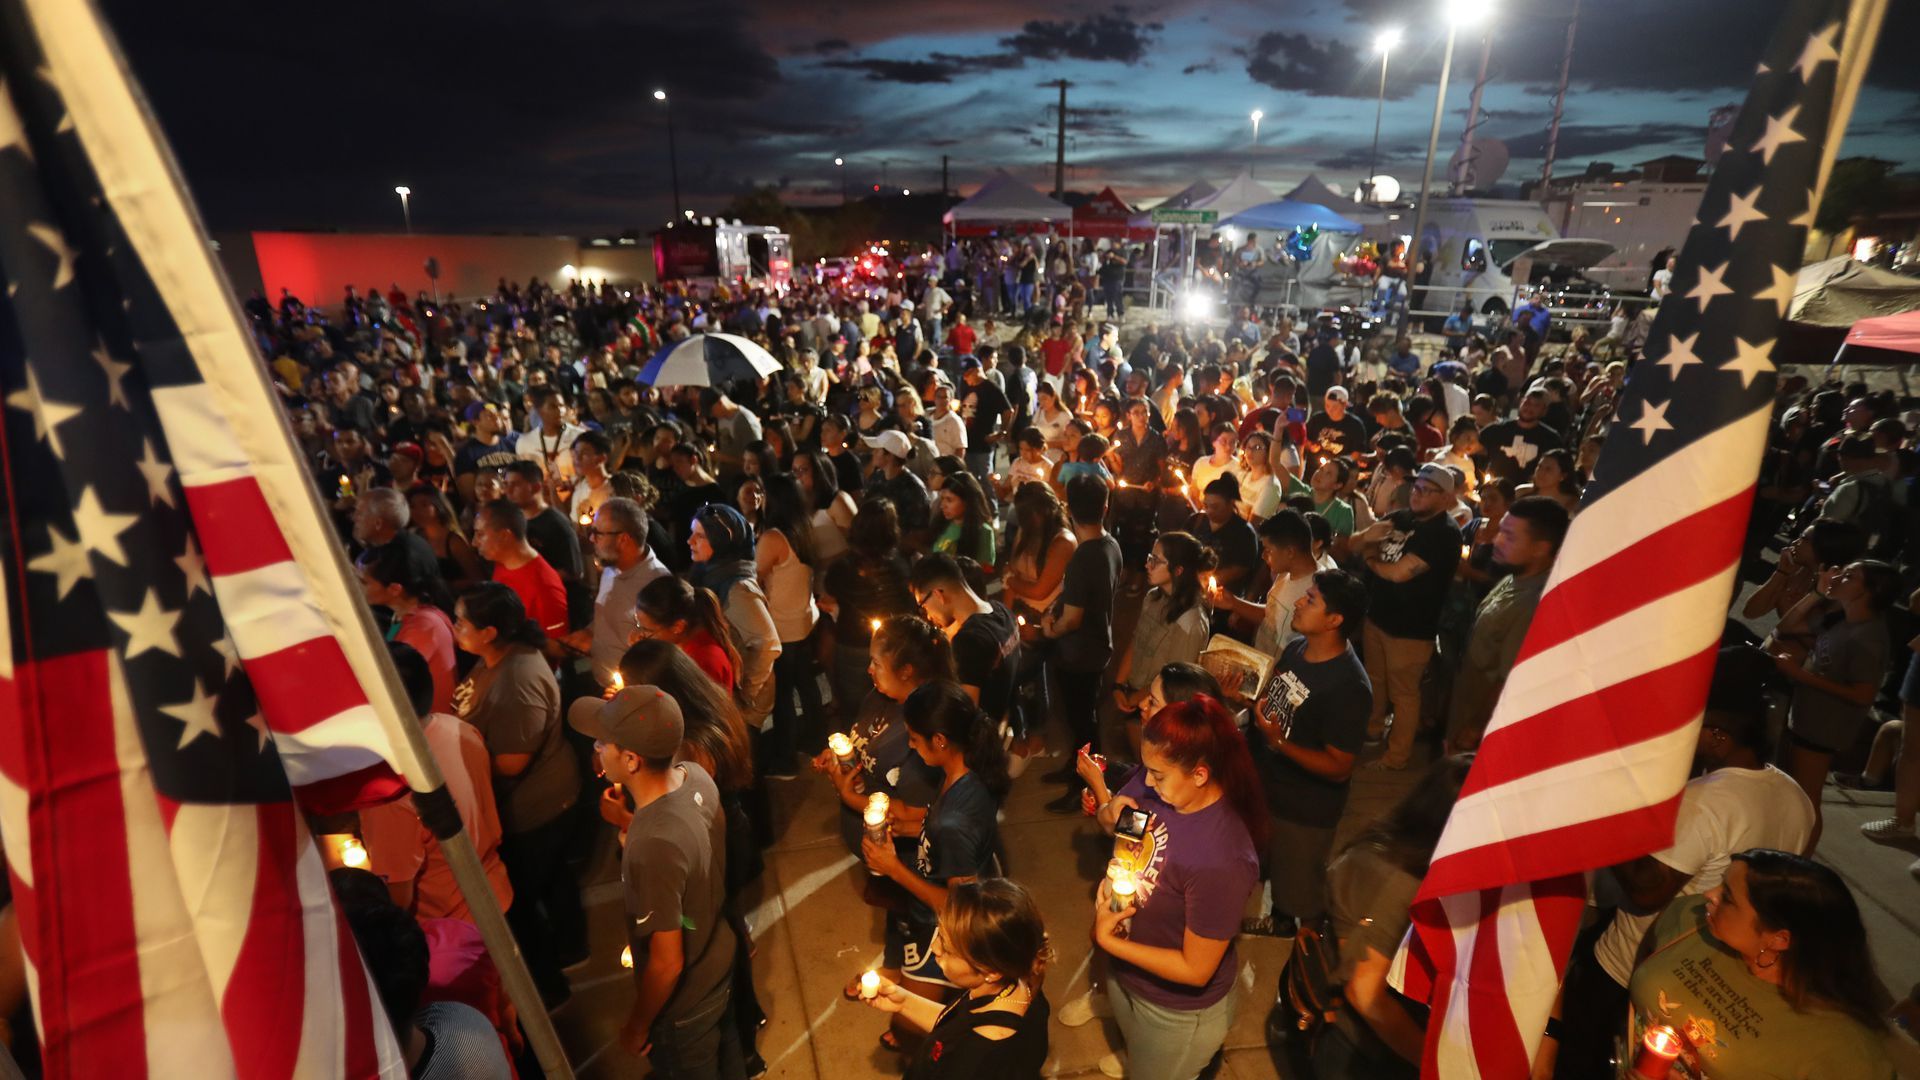 A large crowd of mourners hold candles during a night time vigil in El Paso Texas. one person waves a large American flag. 